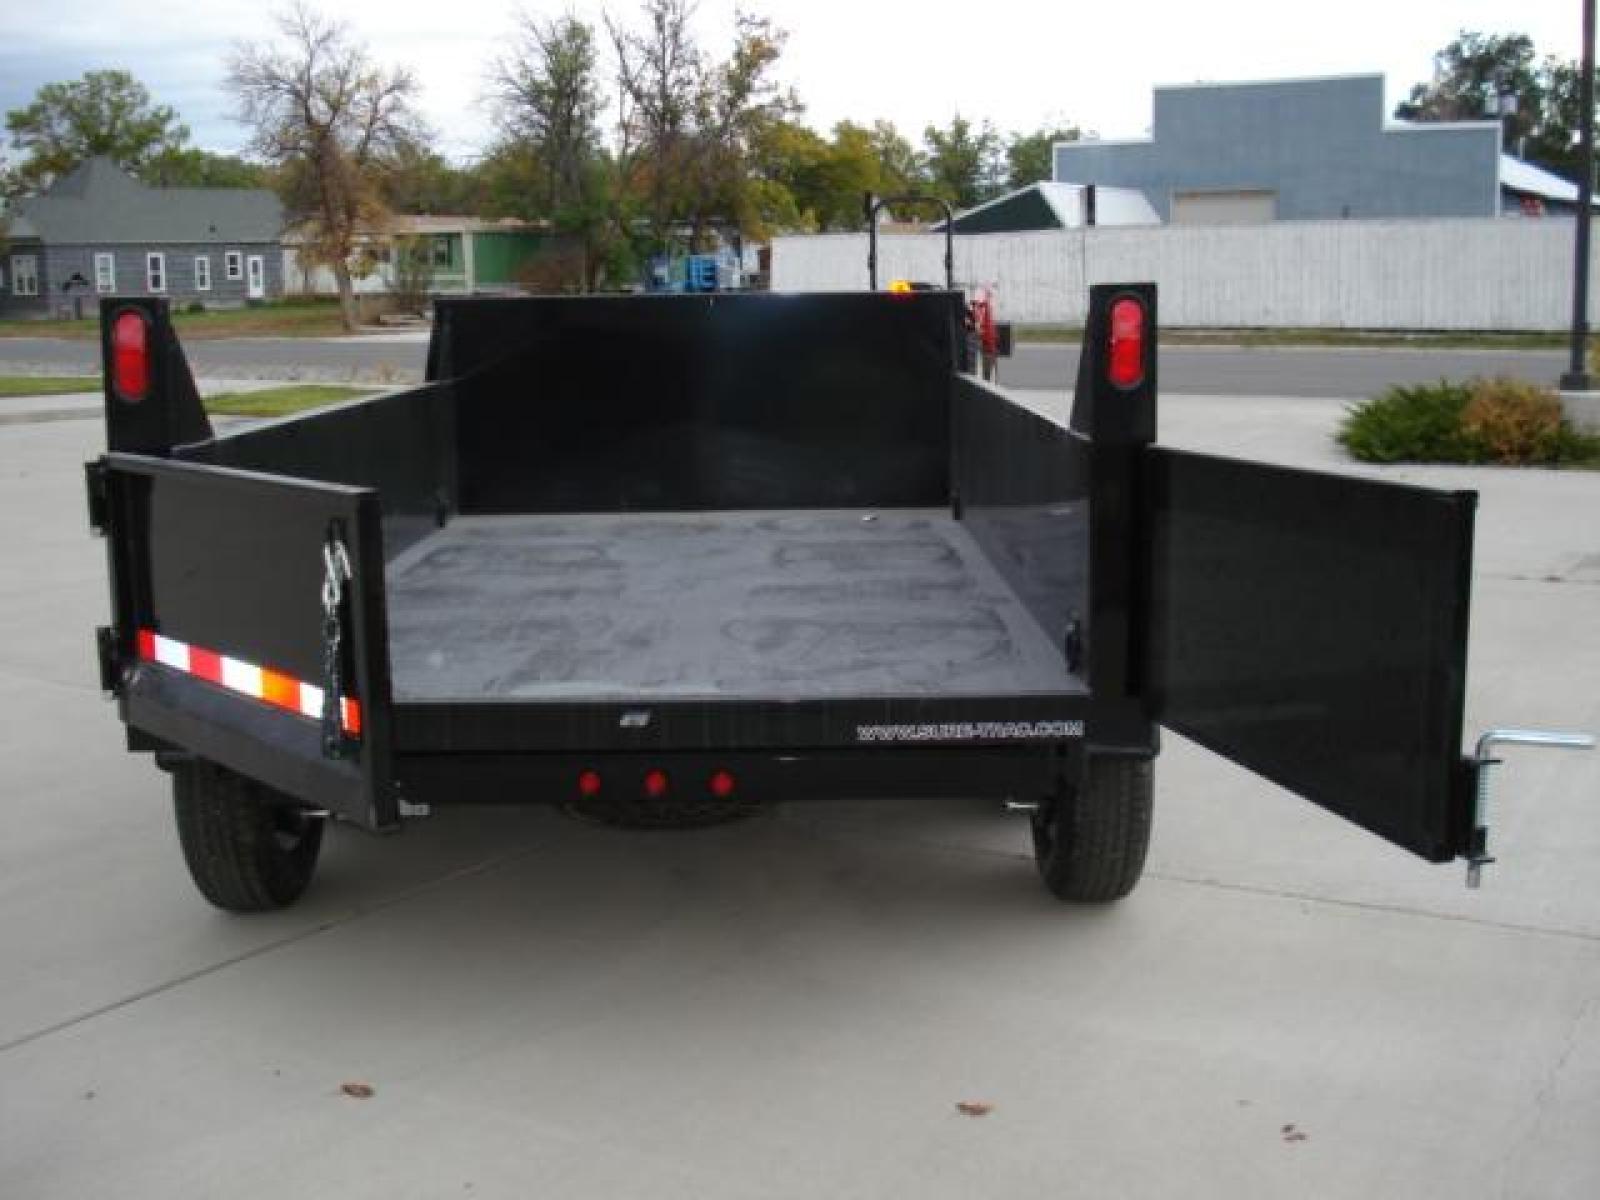 2022 Black SureTrac 6 x10 Lo Pro Dump Trailer , located at 310 West 1st Ave, Big Timber, MT, 59011, (406) 860-8510, 45.833511, -109.957809 - SURE-TRAC 6 X 10 LO PRO DUMP TRAILER, 10K GVW, SINGLE RAM HOIST, EZ LUBE HUBS, DUAL REAR GATE, BRAKES BOTH AXLES, EZ LUBE HUBS, (5) D-RING TIE-DOWNS, LED LIGHTS, POWDER COAT FINISH, REAR RAMPS, MESH TARP, DEEP CYCLE BATTERY. OPTIONS: SPARE TIRE $165.00. THE BEST TRAILERS AT THE BEST PRICE!!! - Photo #8